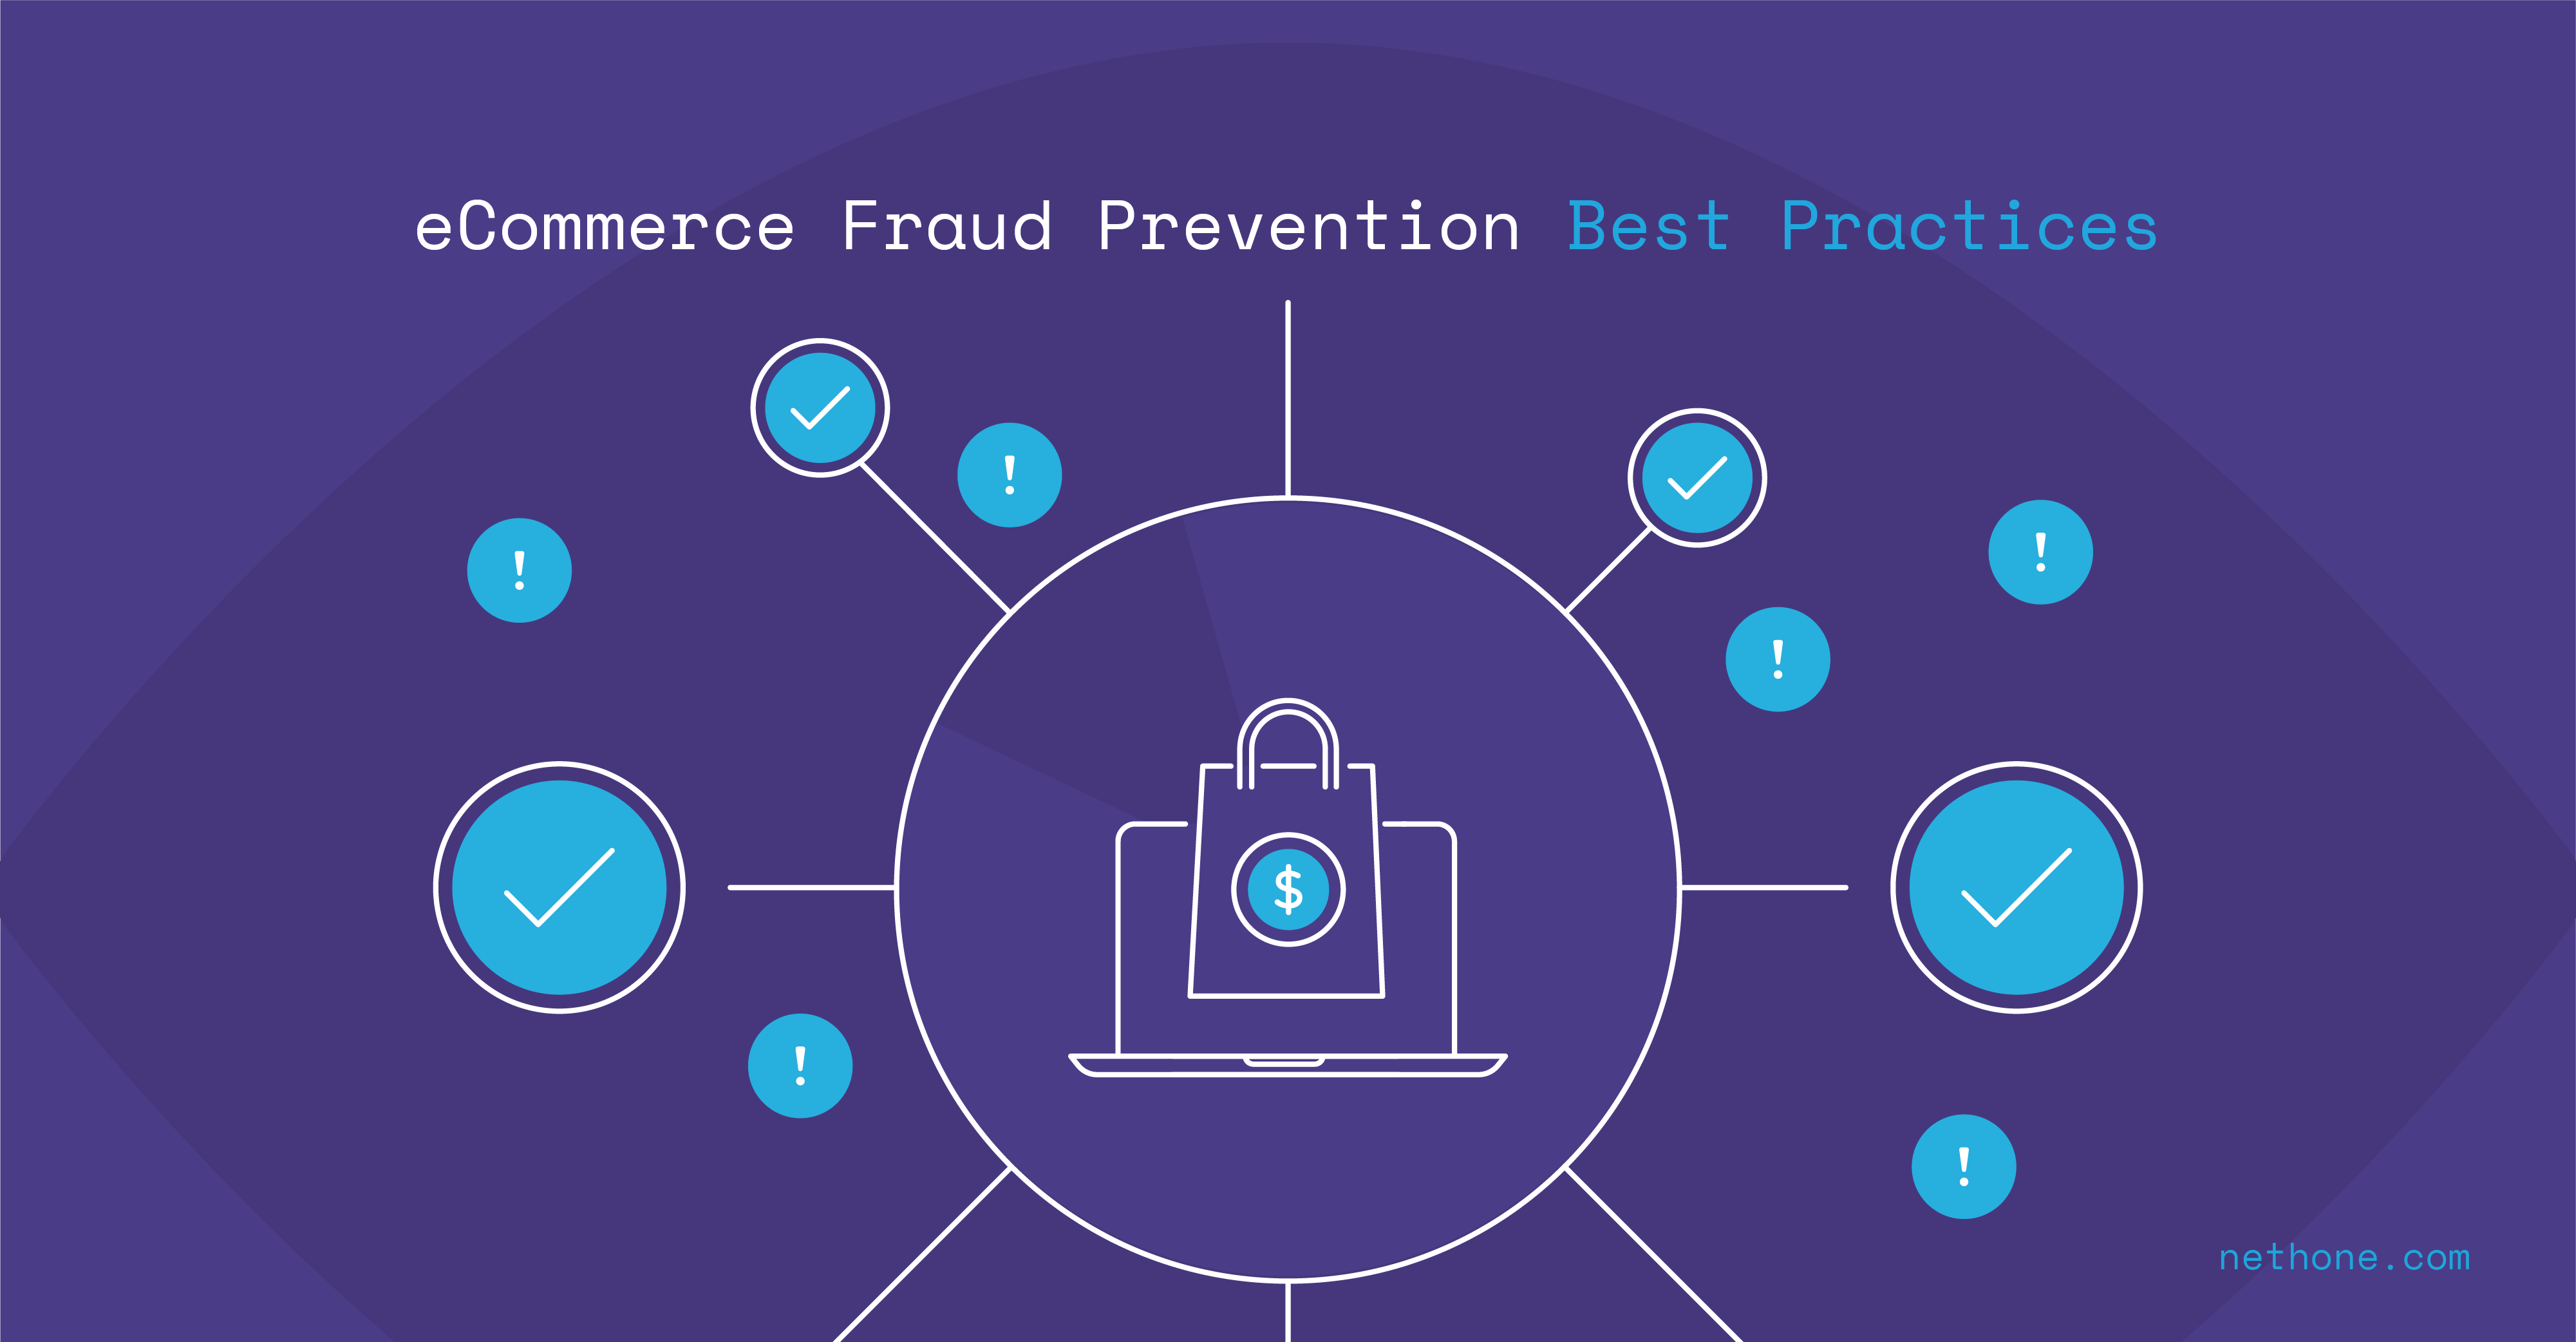 eCommerce Fraud Prevention: Best Practices